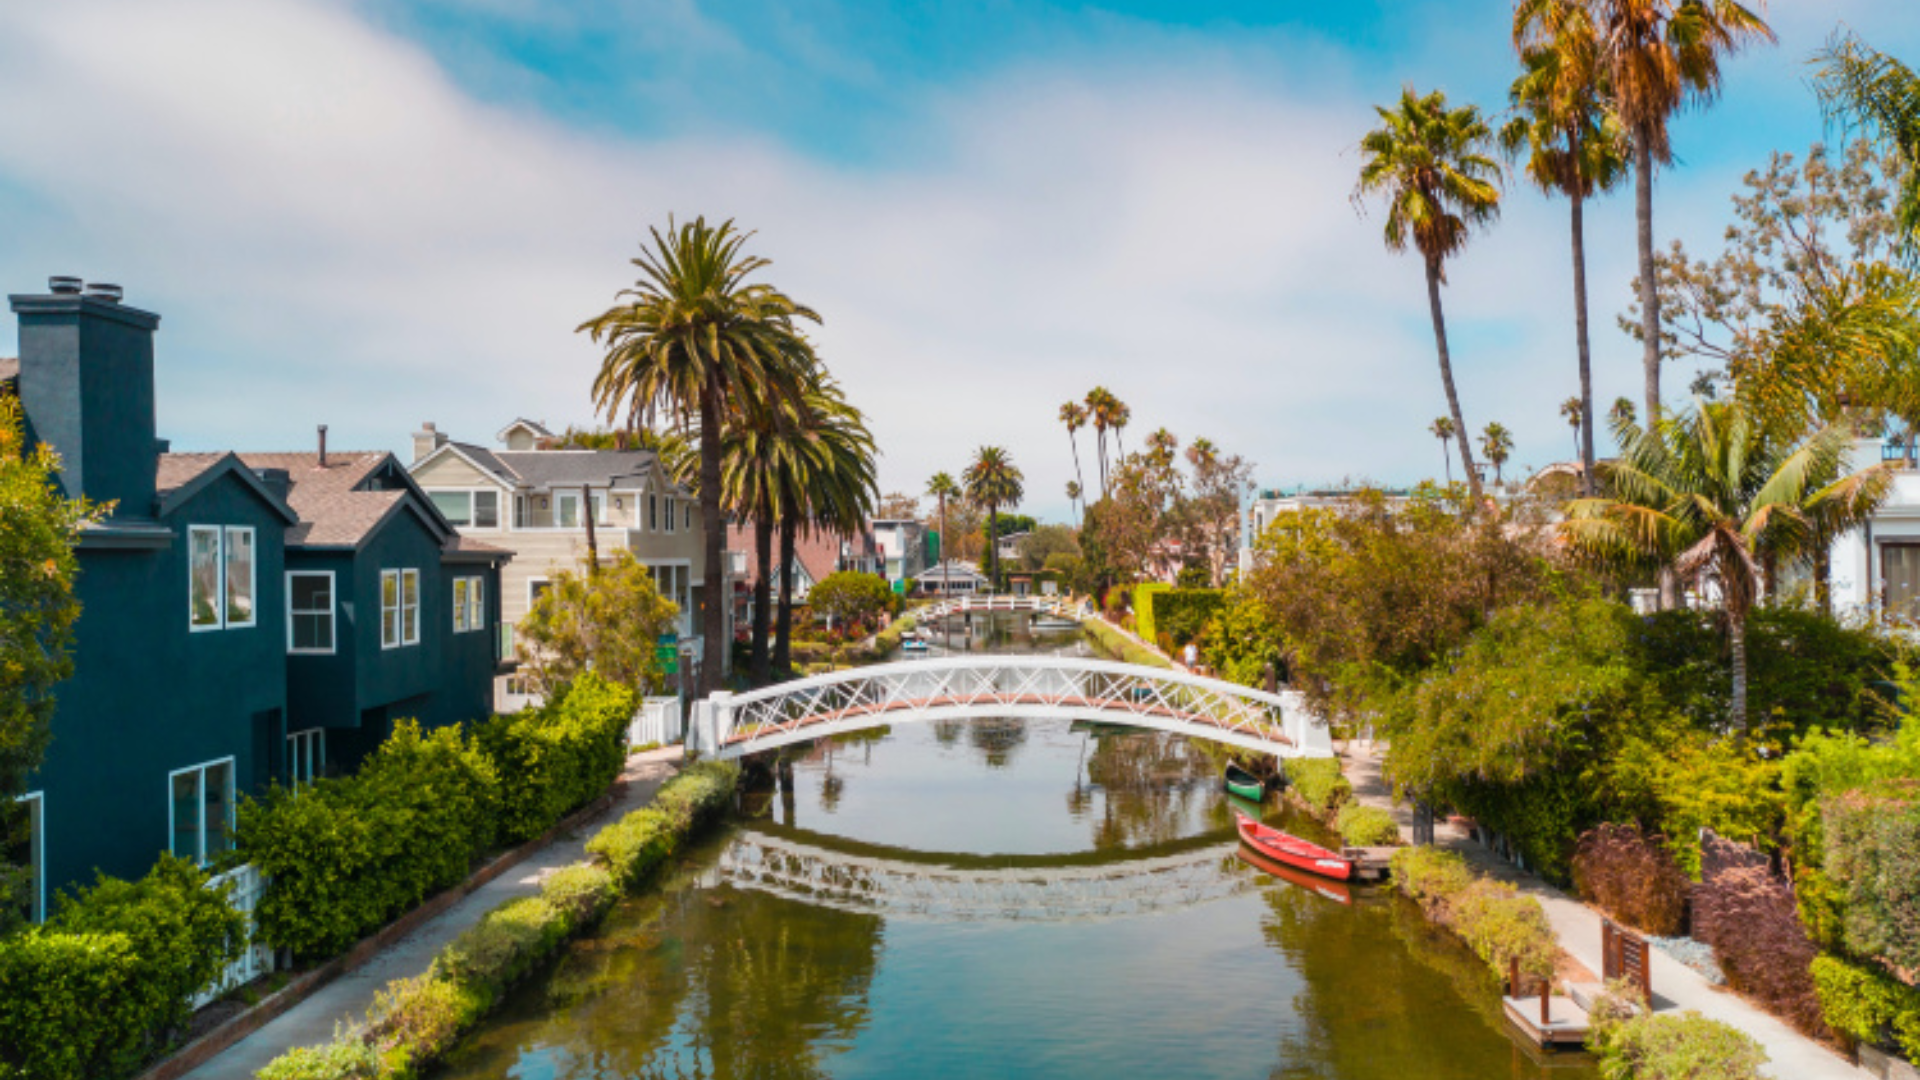 Best Things to do in Venice Beach